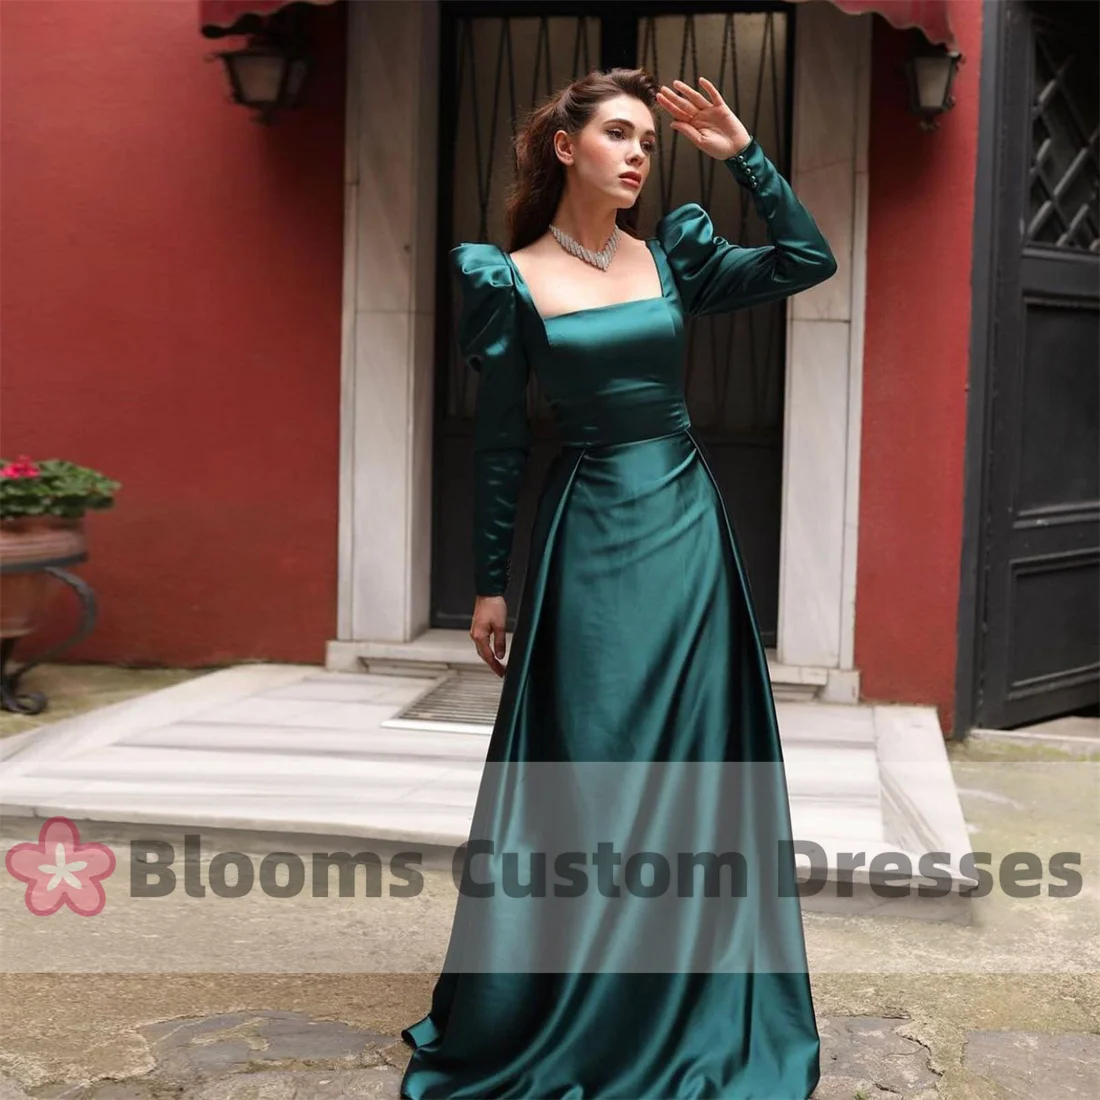 

Blooms Shiny Spandex Satin Elegant Women Evening Dresses Long Sleeves A-Line Custom Prom Dress Square Neck Formal Occasion Gown